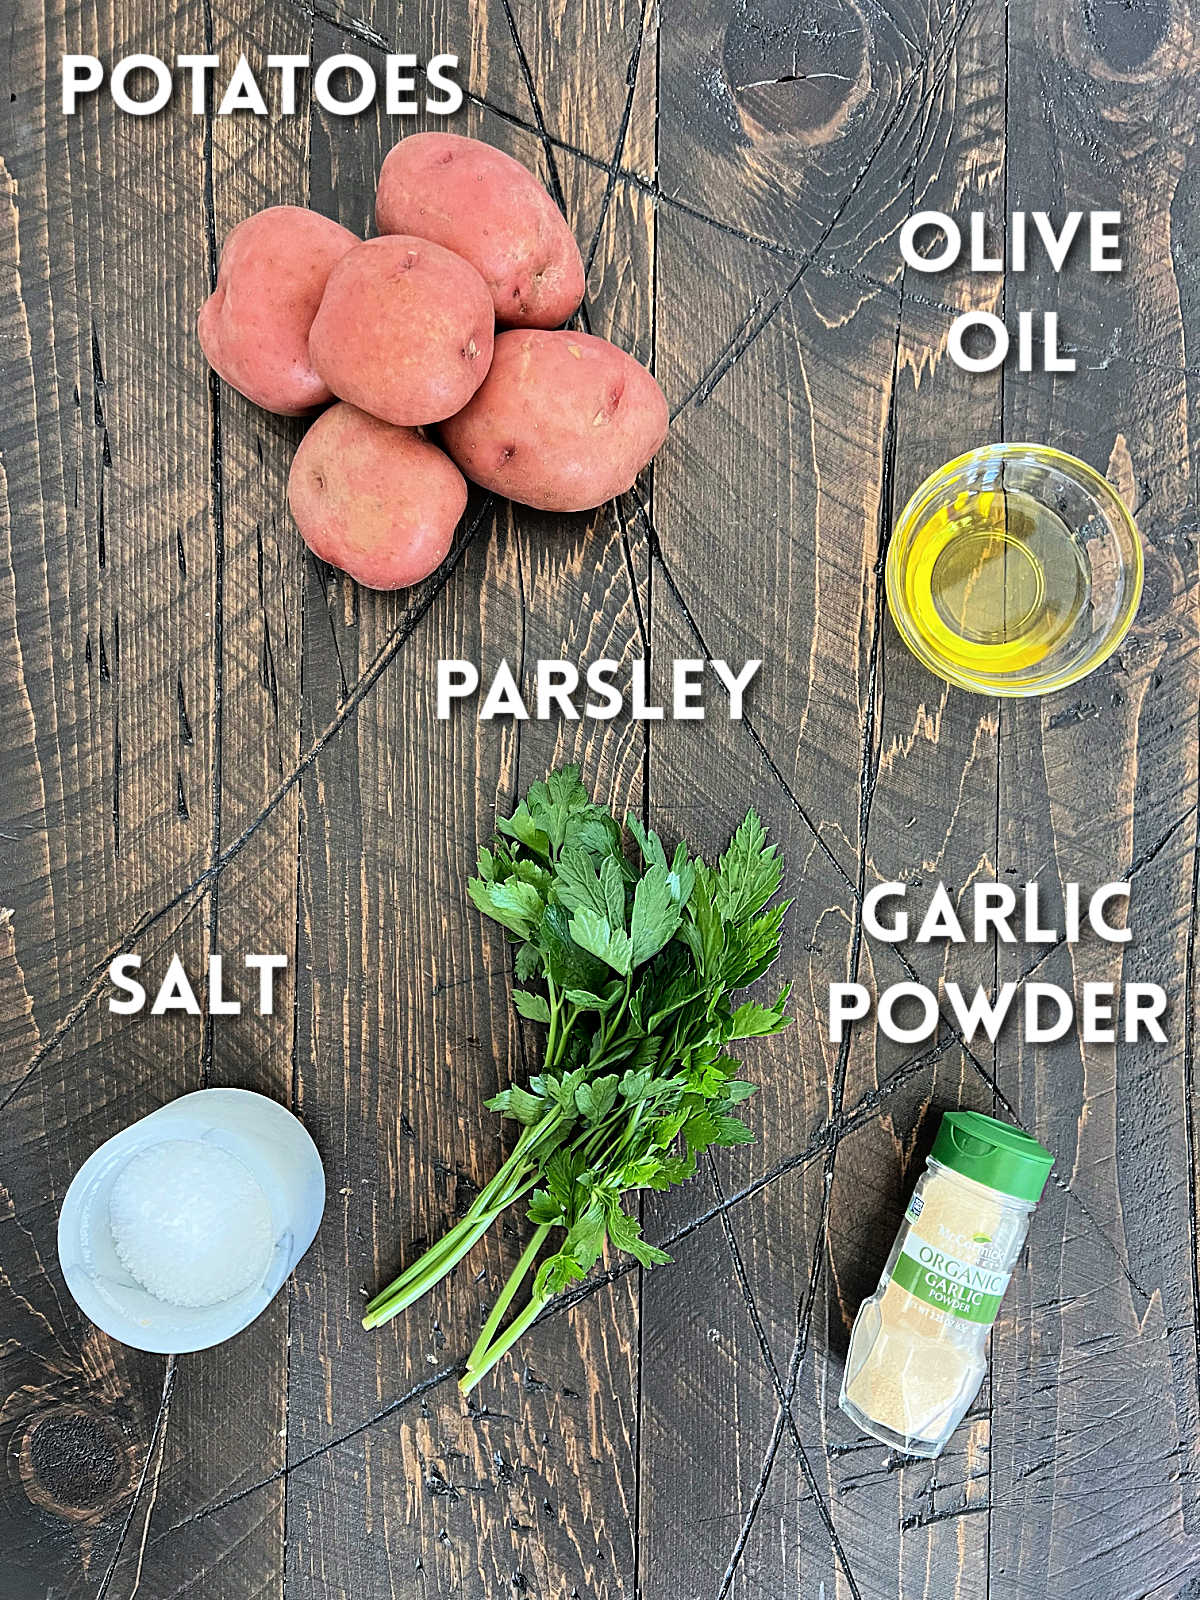 Ingredients for air fryer diced potatoes on a wooden board.